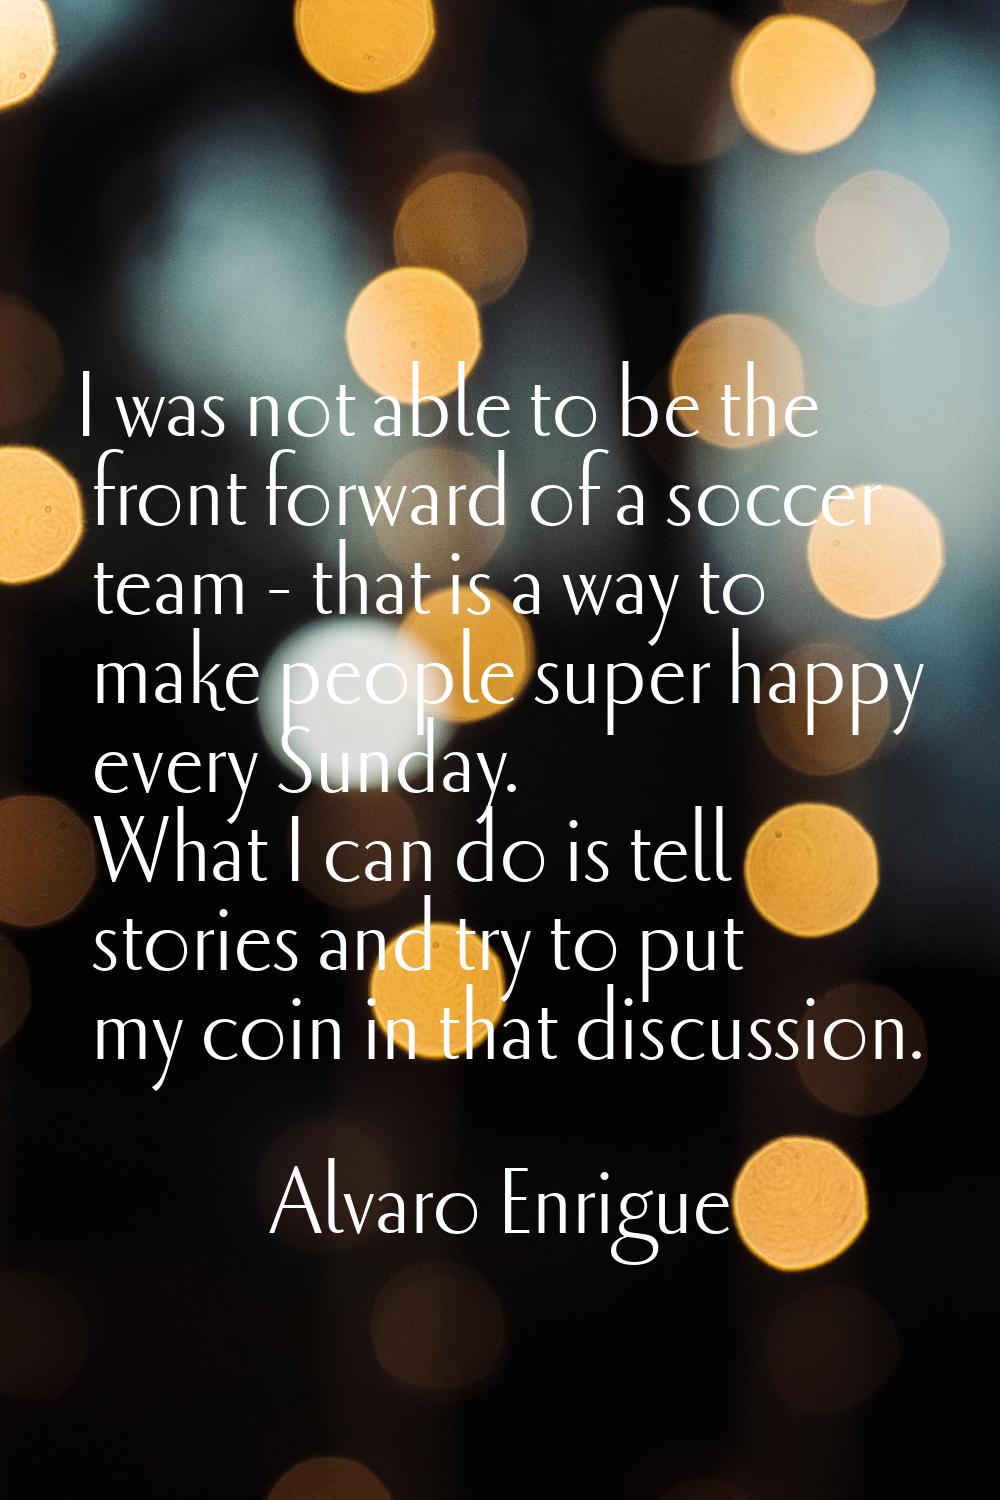 I was not able to be the front forward of a soccer team - that is a way to make people super happy 